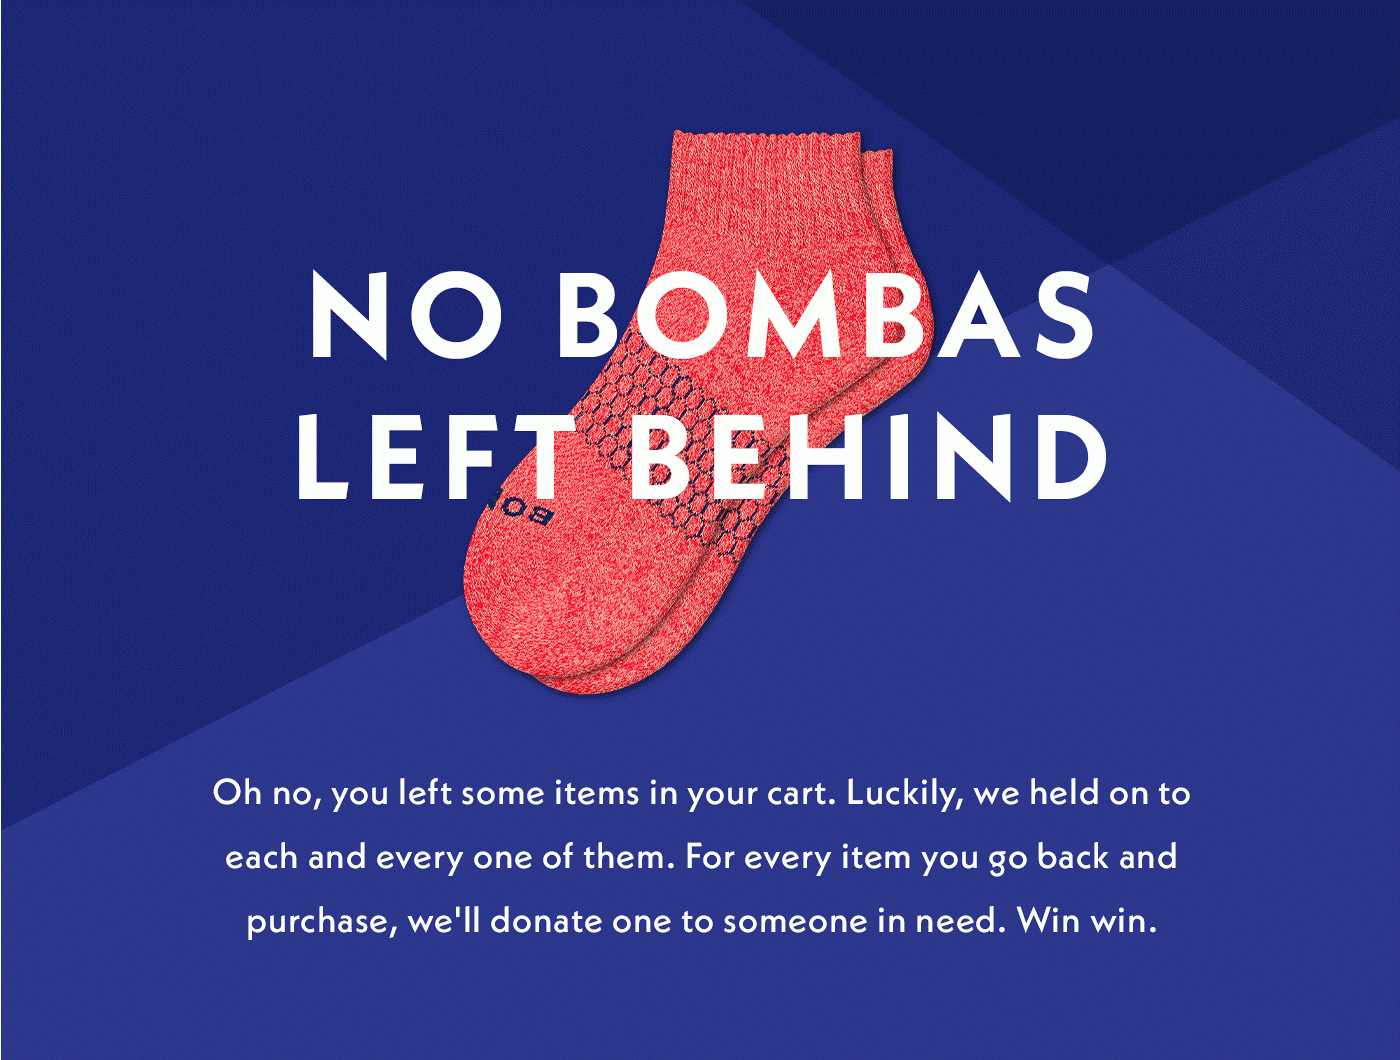 NO BOMBAS LEFT BEHIND | Oh no, you left some items in your cart. Luckily, we held on to each and every one of them. For every item you go back and purchase, we'll donate to someone in need. Win win.